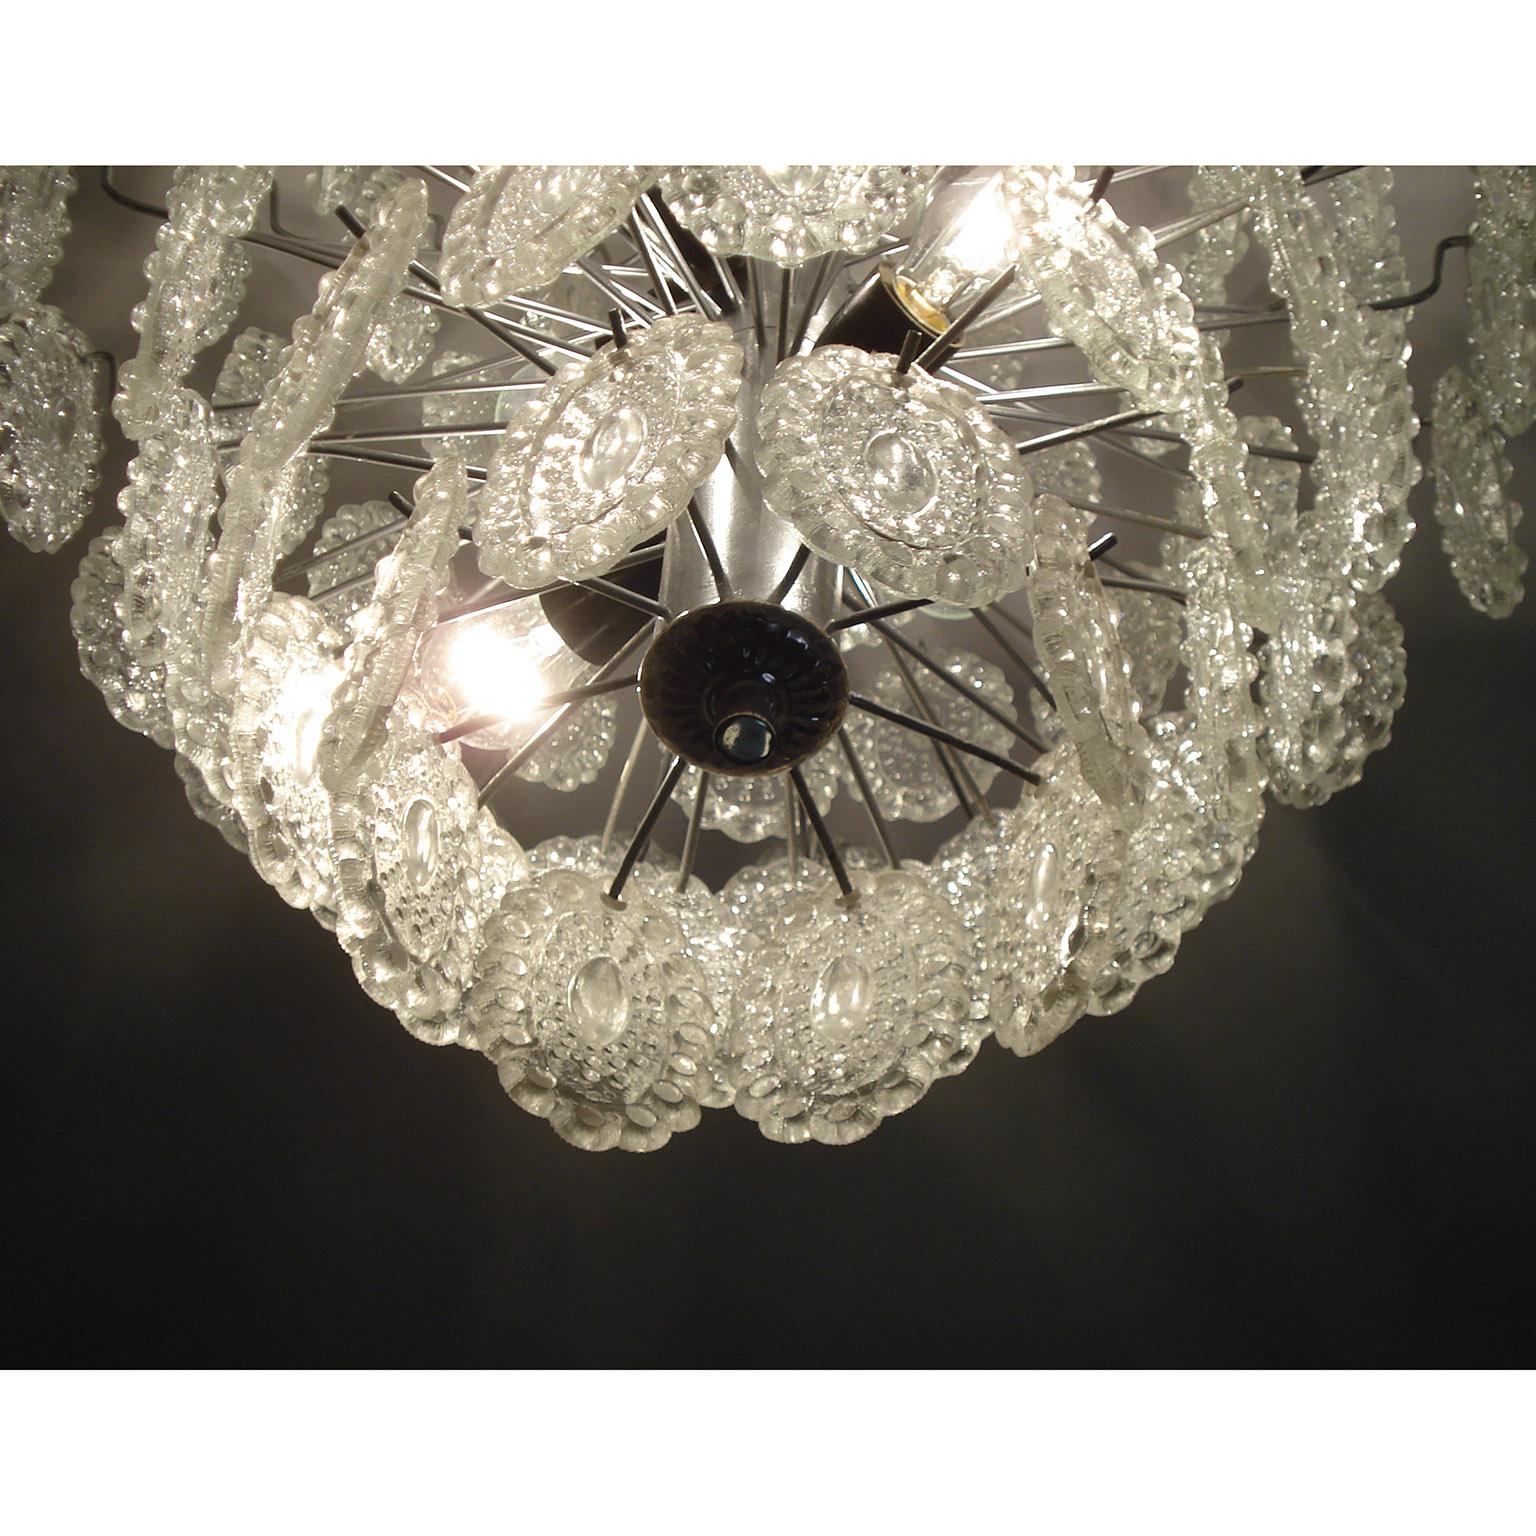 Italian Crystal Glass Chandelier in the Style of Mazzega, 1 of 2 For Sale 2